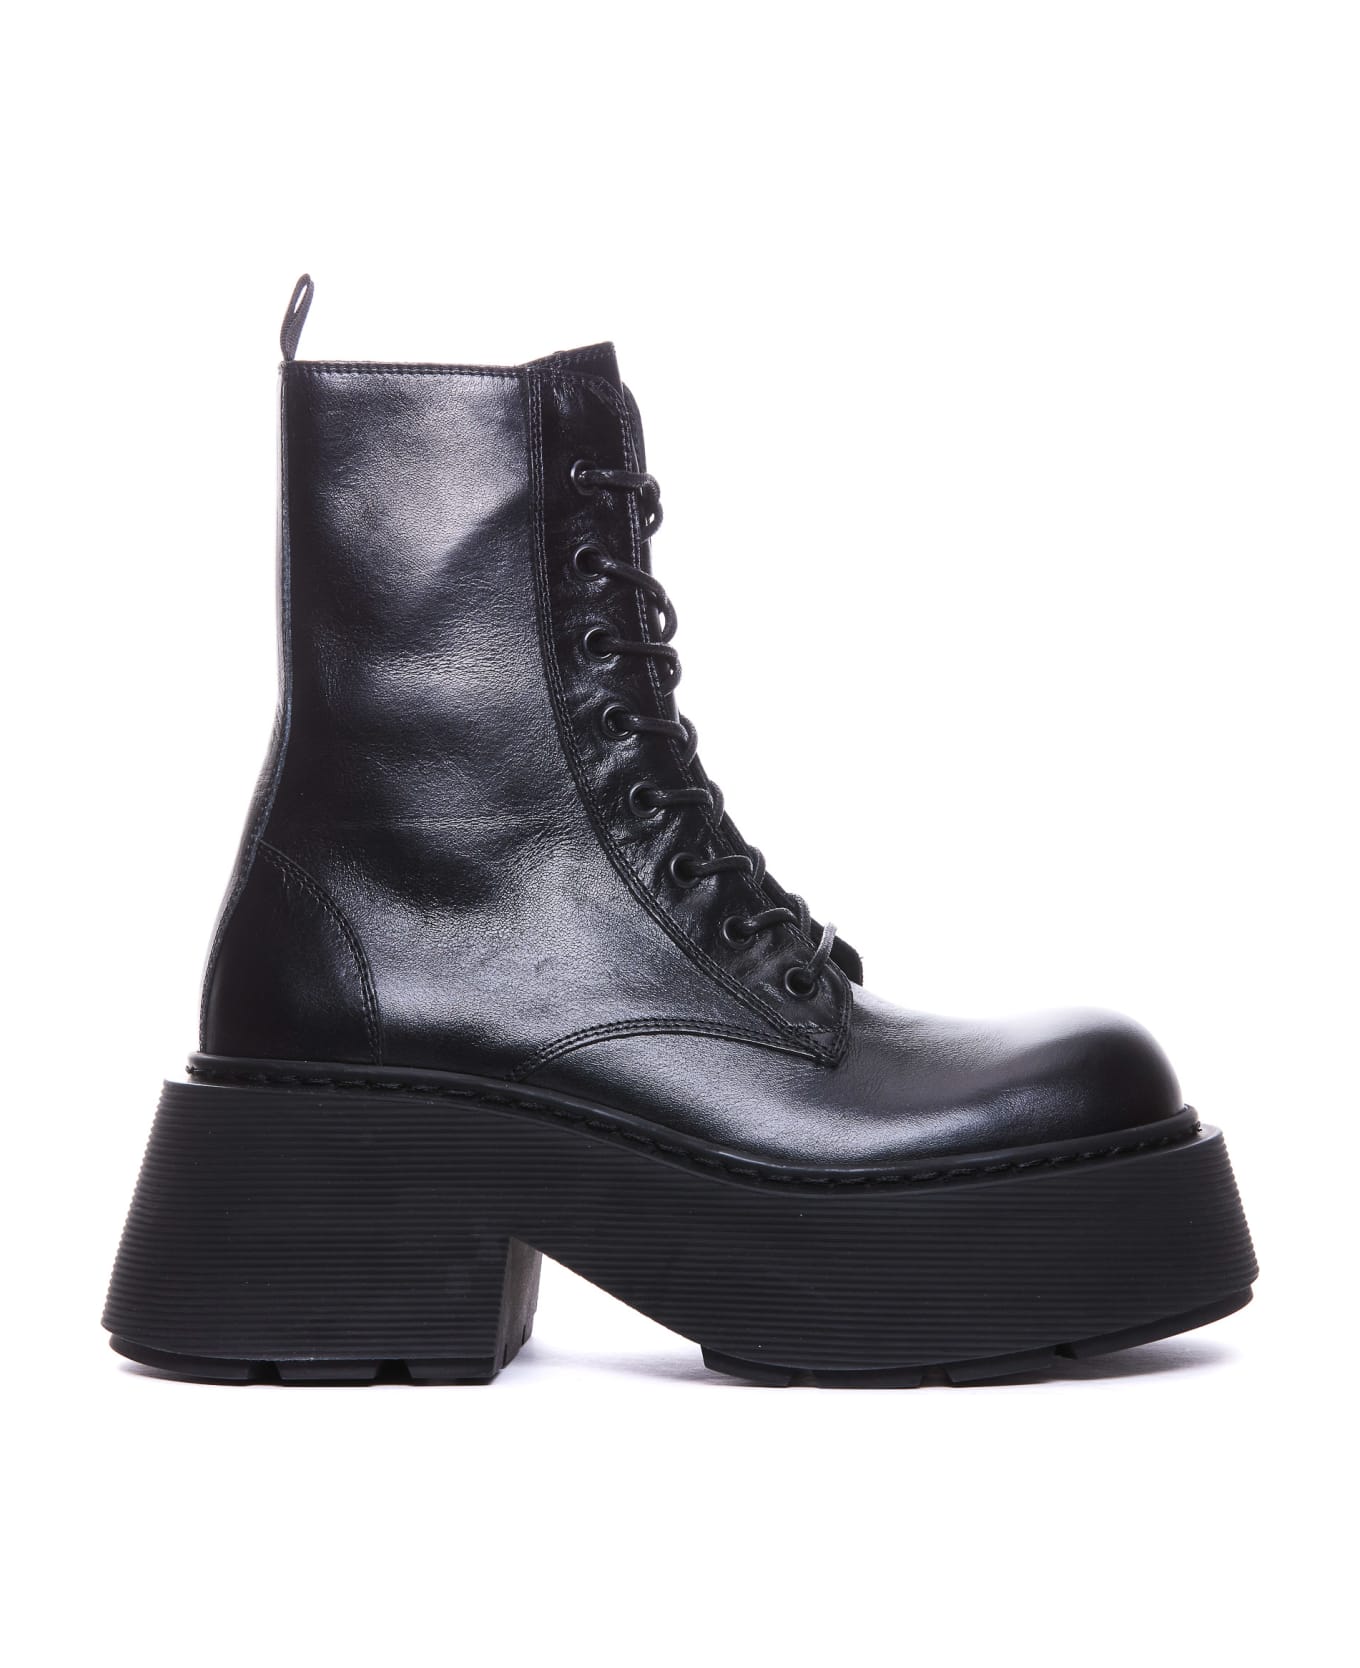 Vic Matié Mayon Ankle Boots - Black ブーツ